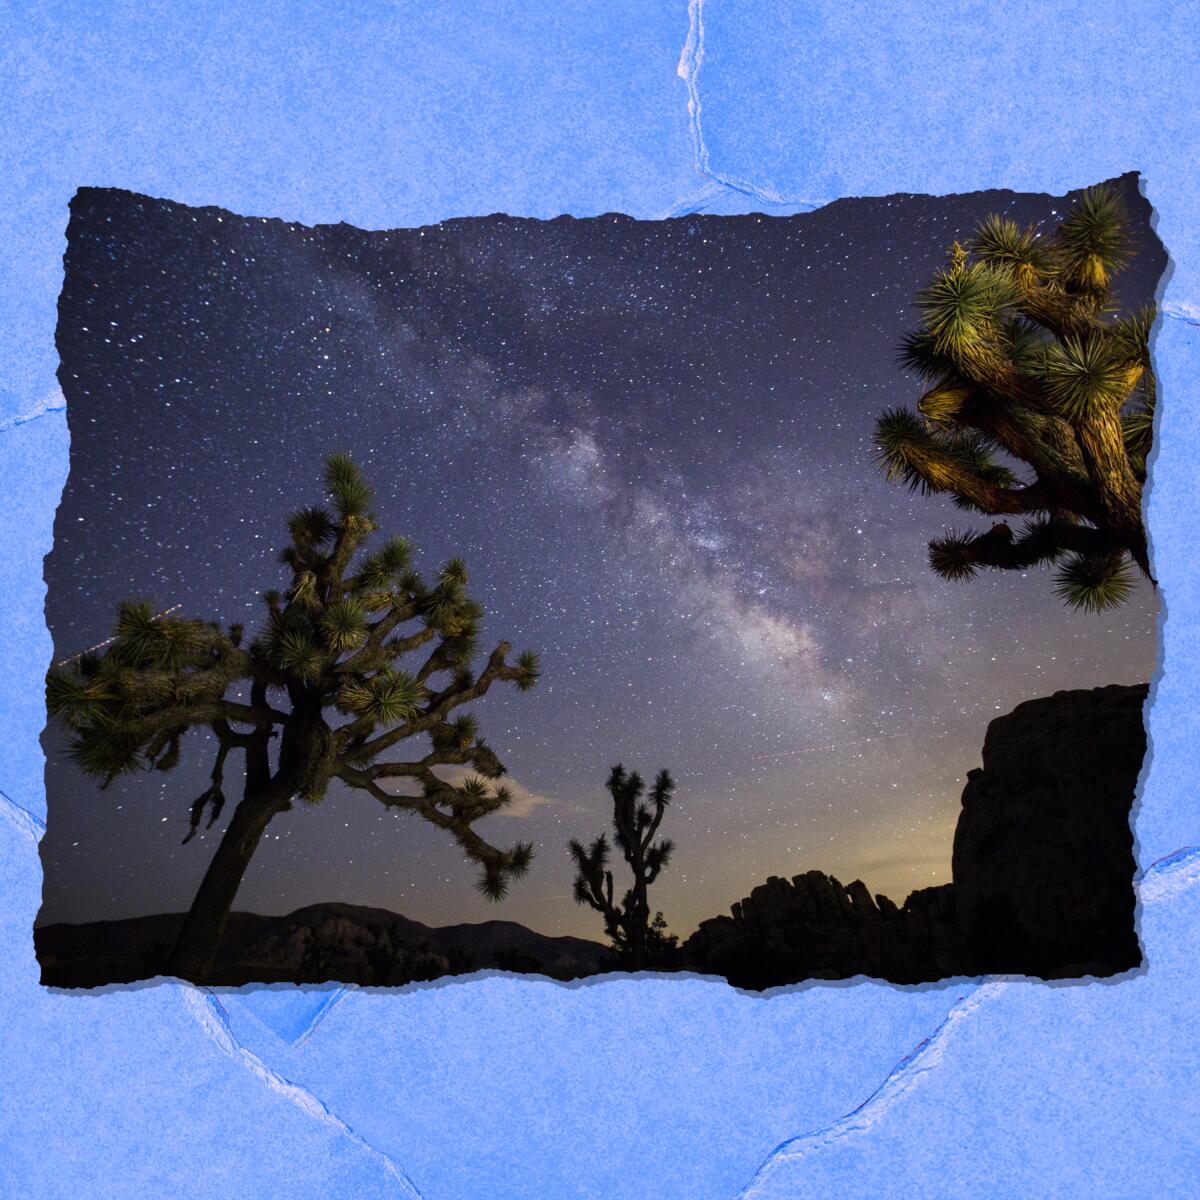 A view of the Milky Way arching over Joshua Trees and rocks at a park campground